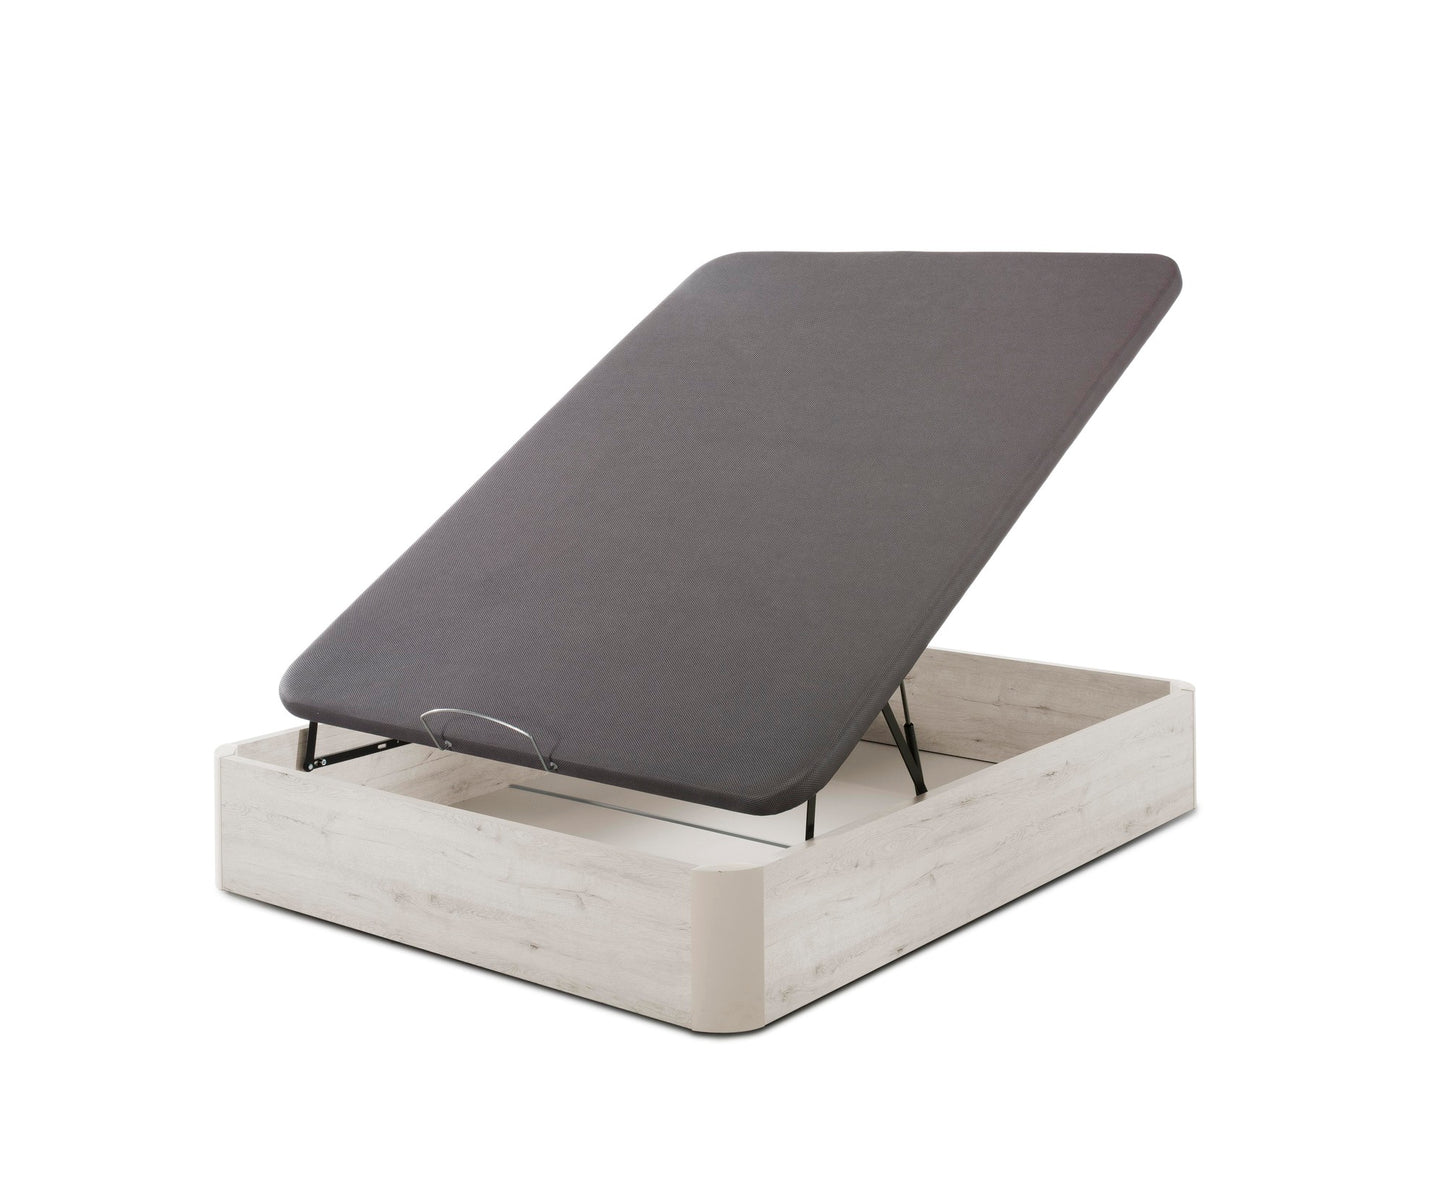 Wooden high strength and capacity boxspring | NORDIC GREY